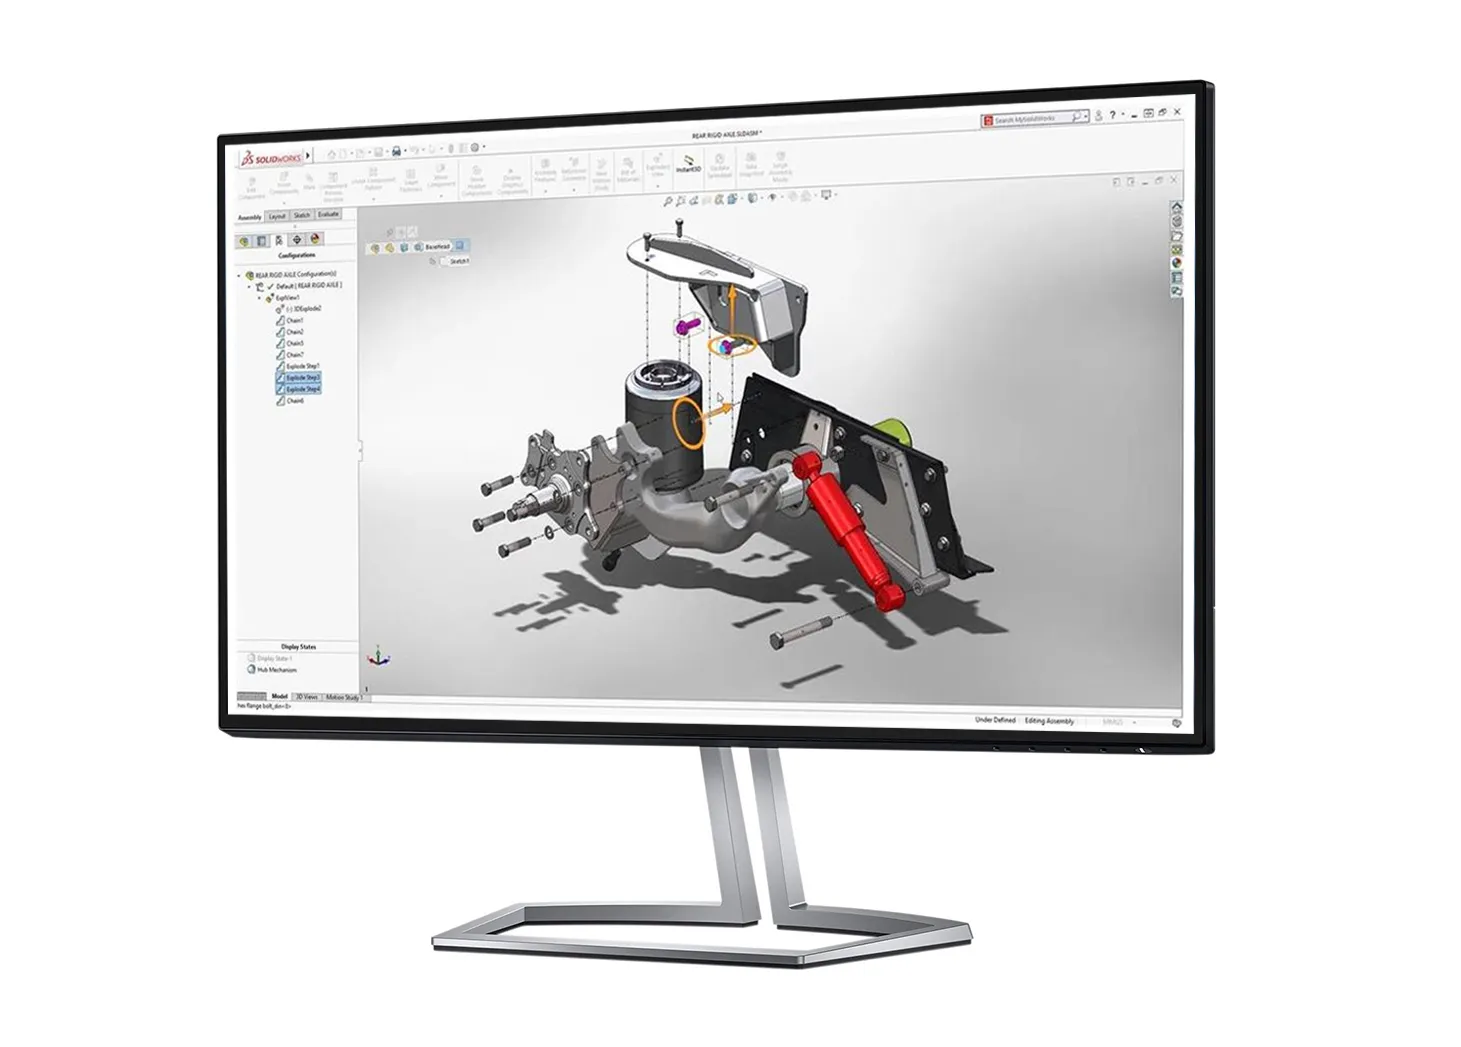 Learn More about how SOLIDWORKS subscription licensing can help you and your organization,